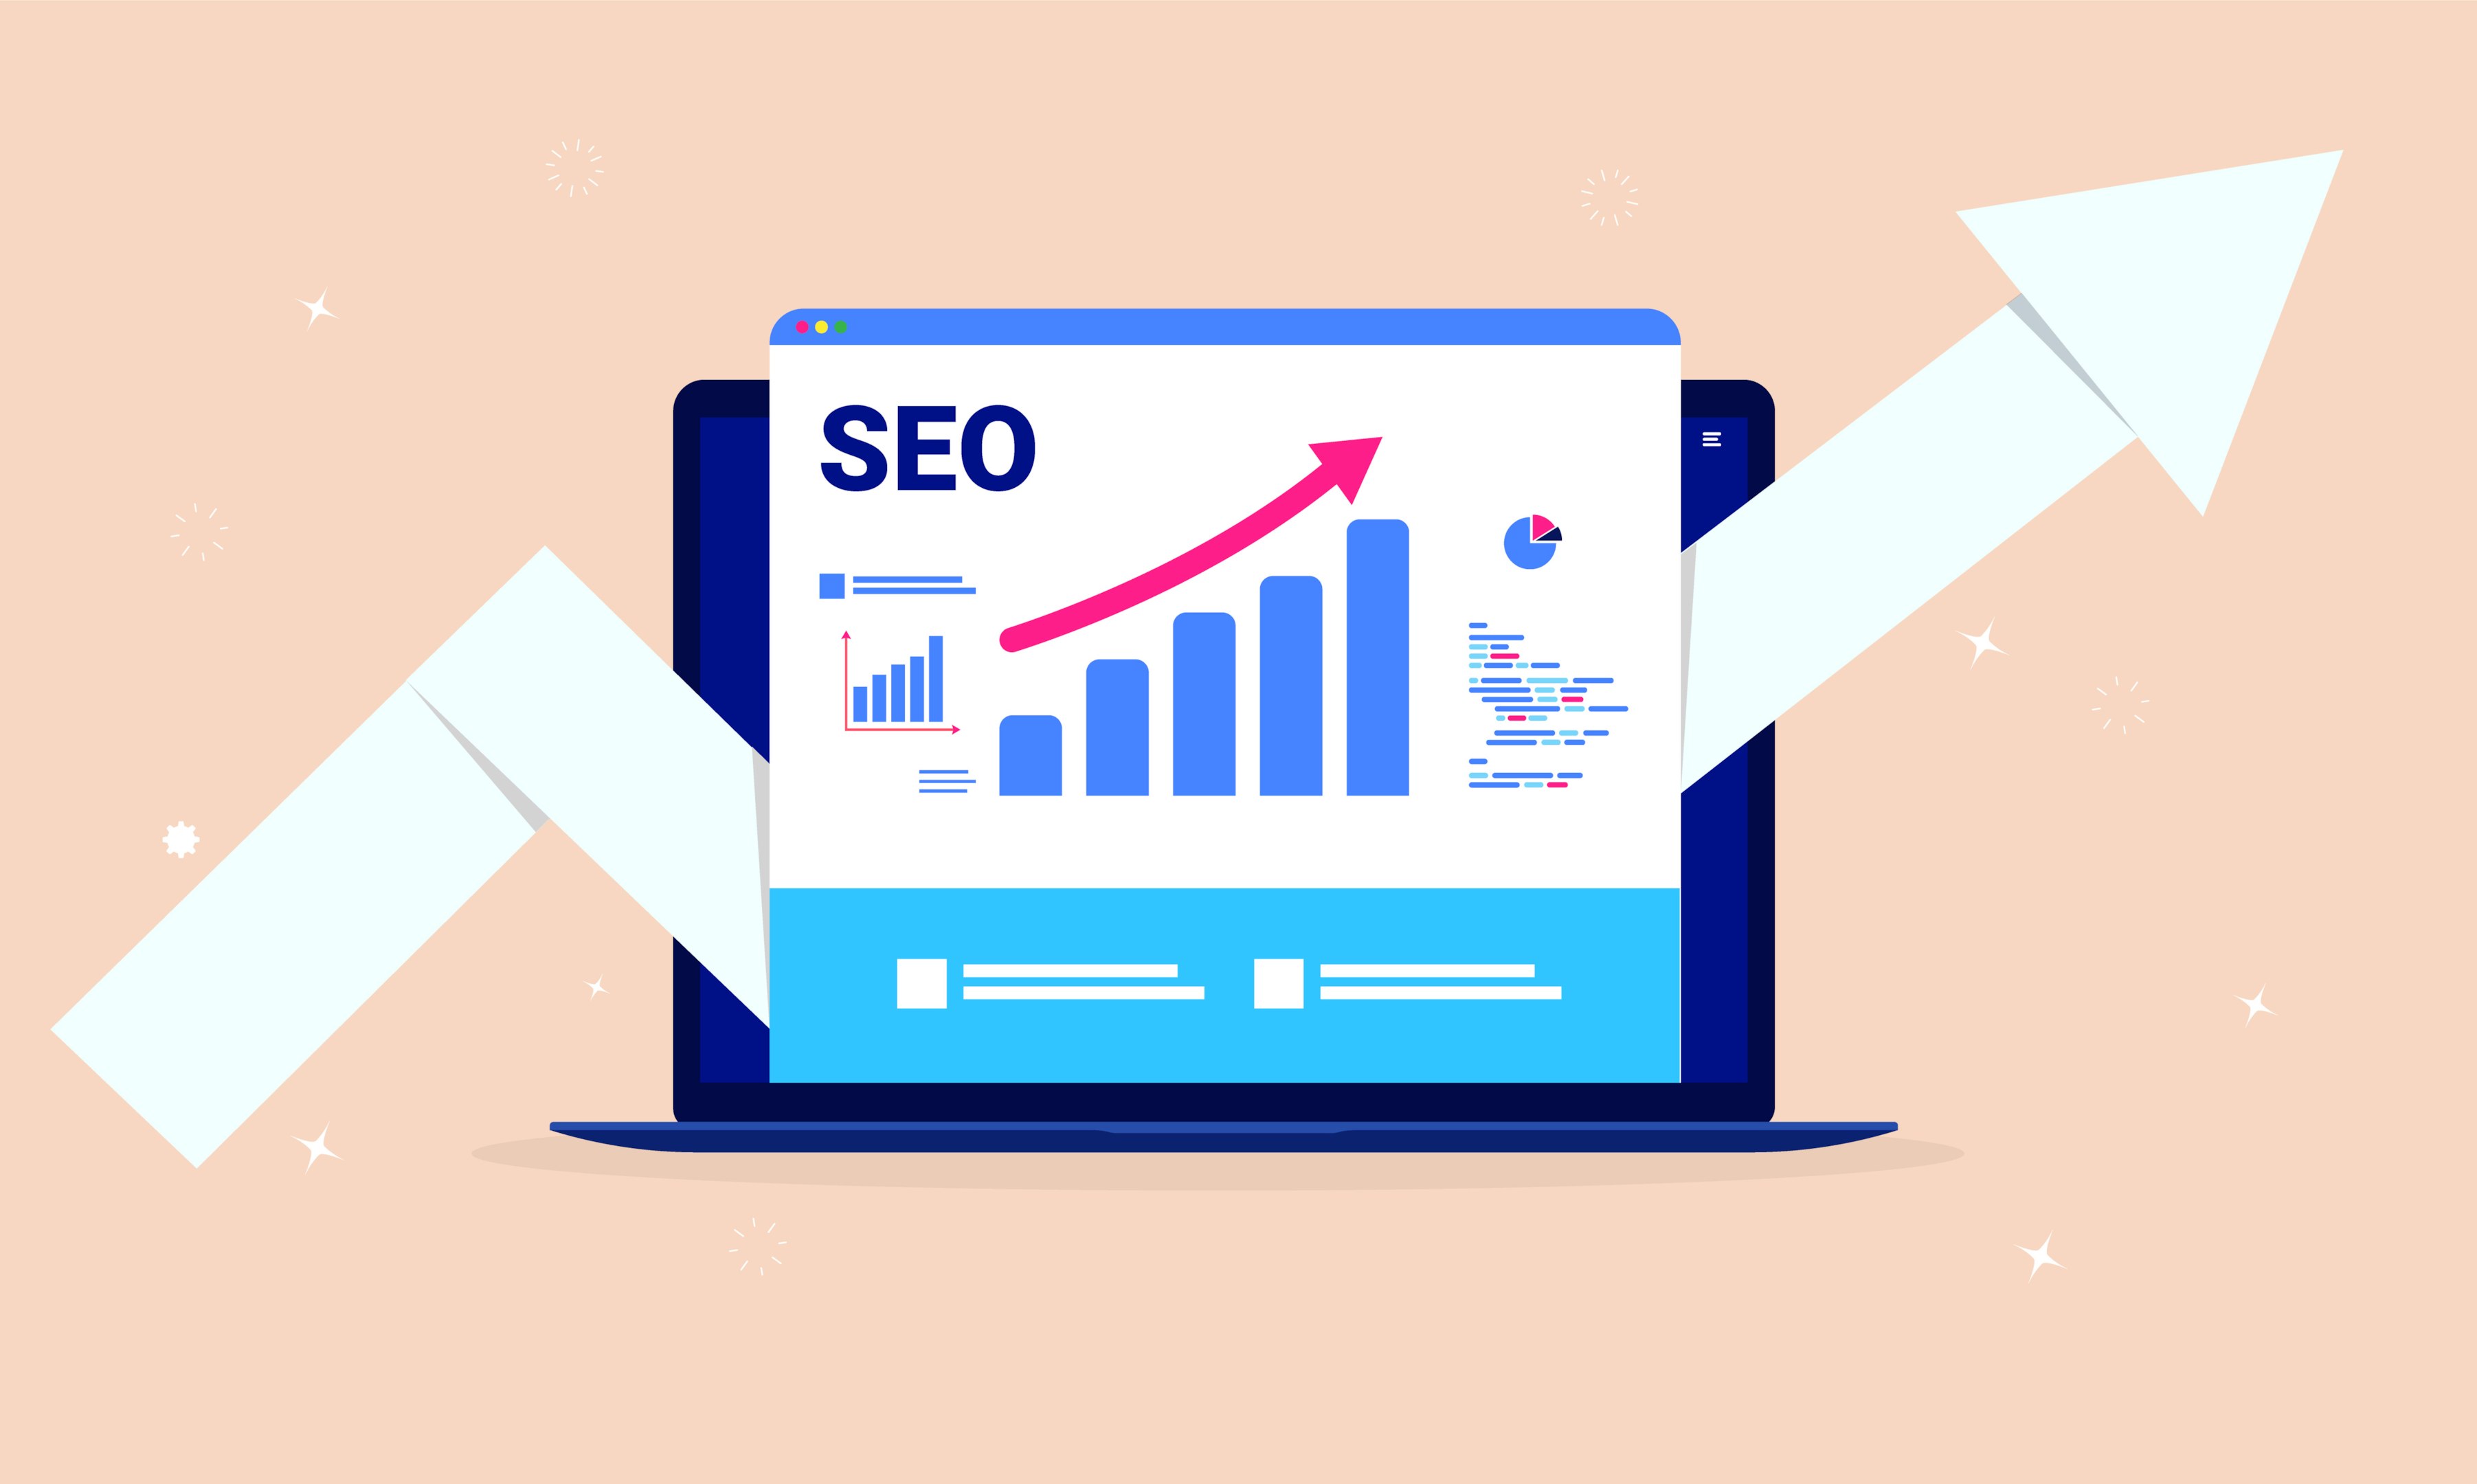 seo along with reputation management